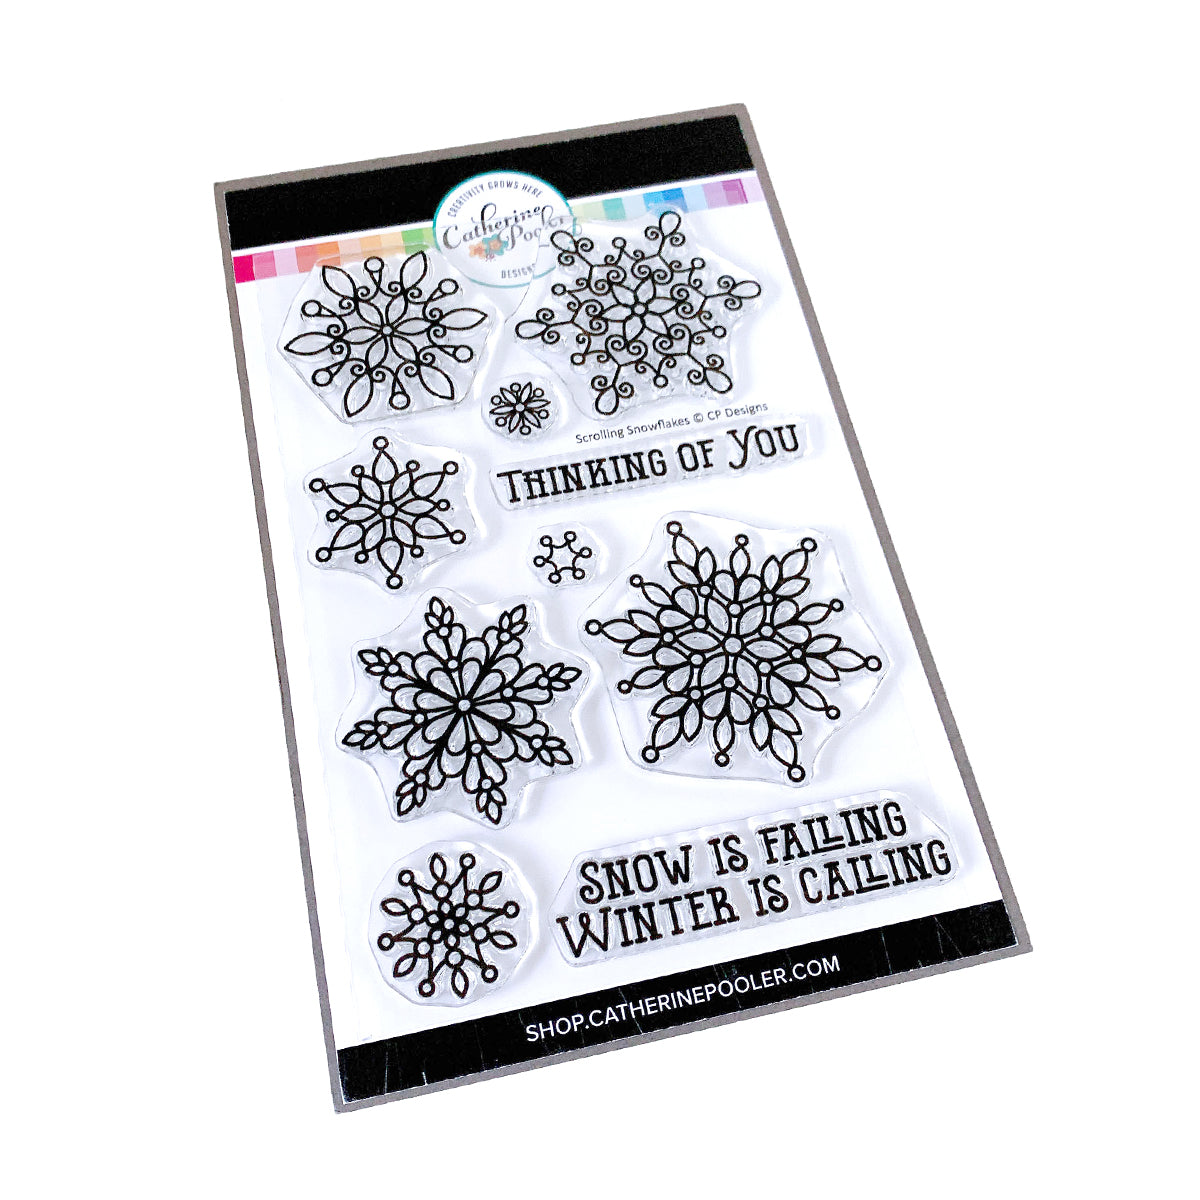 Snowflake Rubber Stamp - Black Graphic, Colored Text Options